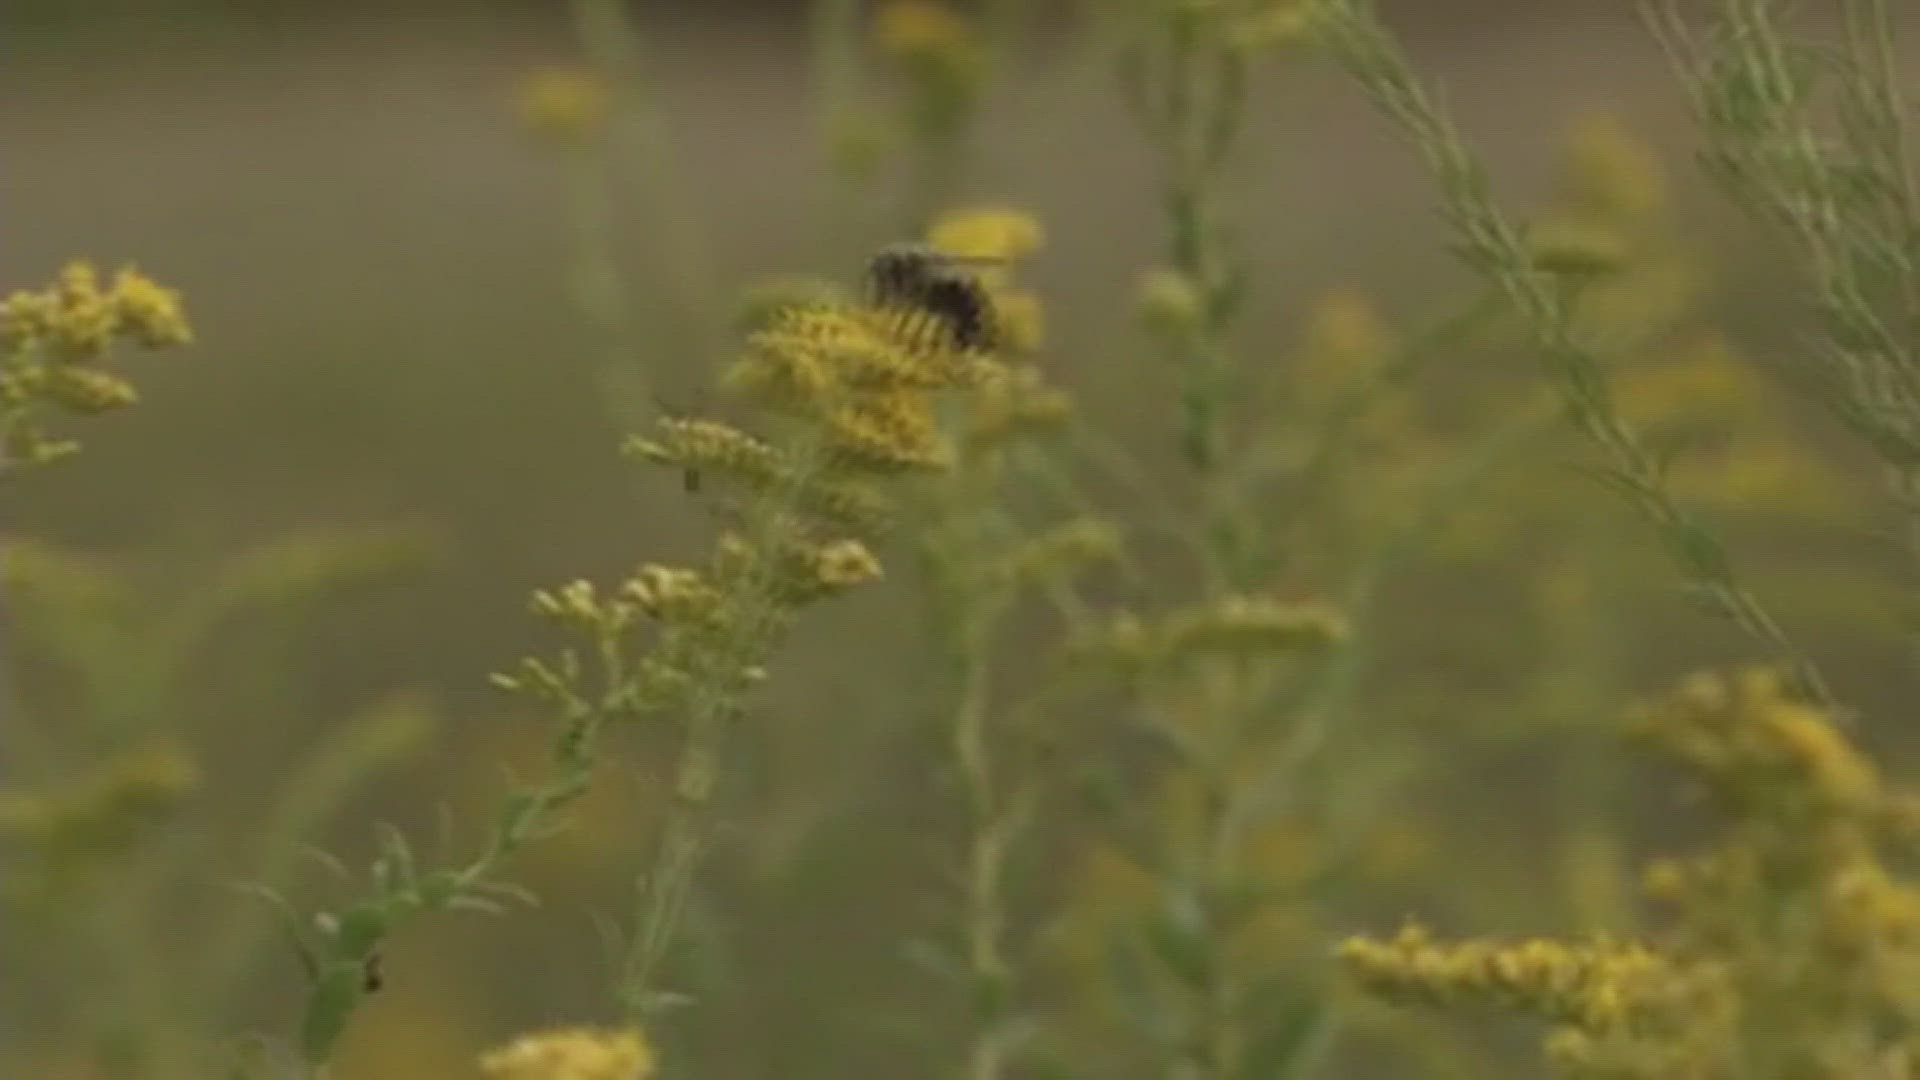 The Iowa DNR hopes local data will help them better inform conservation practices so native bees can thrive just as well as honeybees.